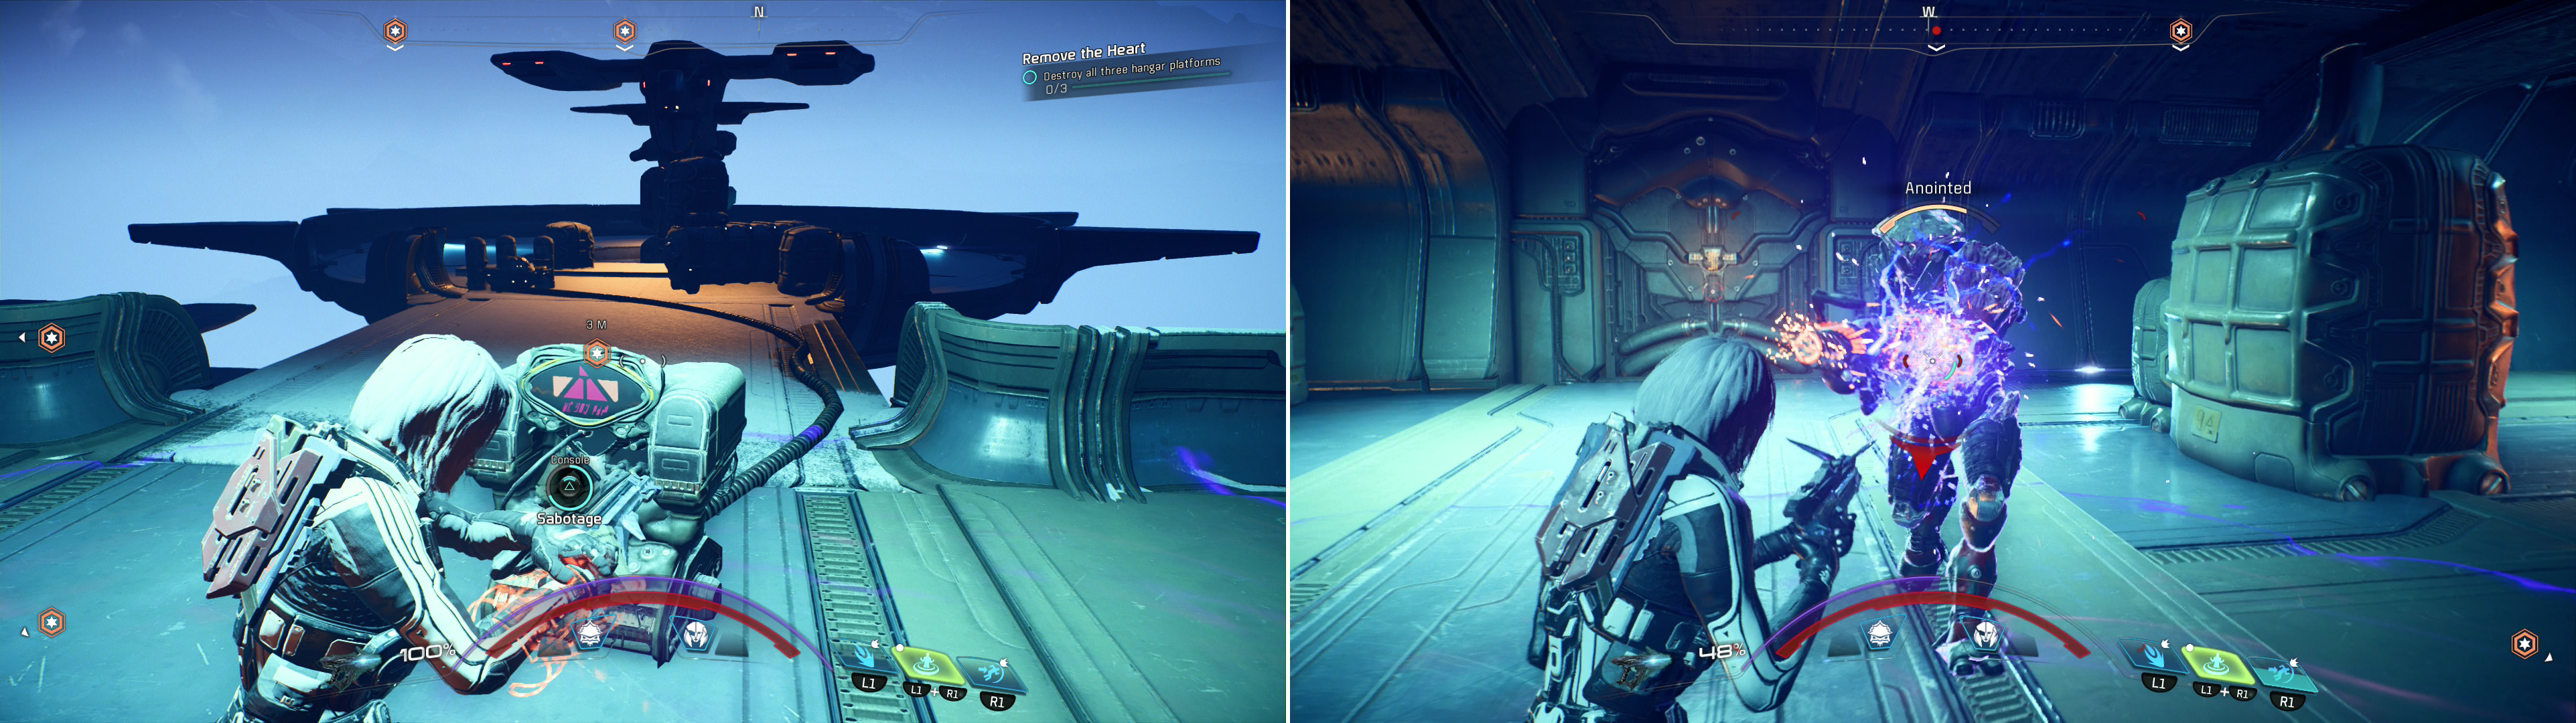 Activate consoles to destroy the base's Hangar Platforms (left) but be wary, as Kett will spawn as you activate the consoles (right).